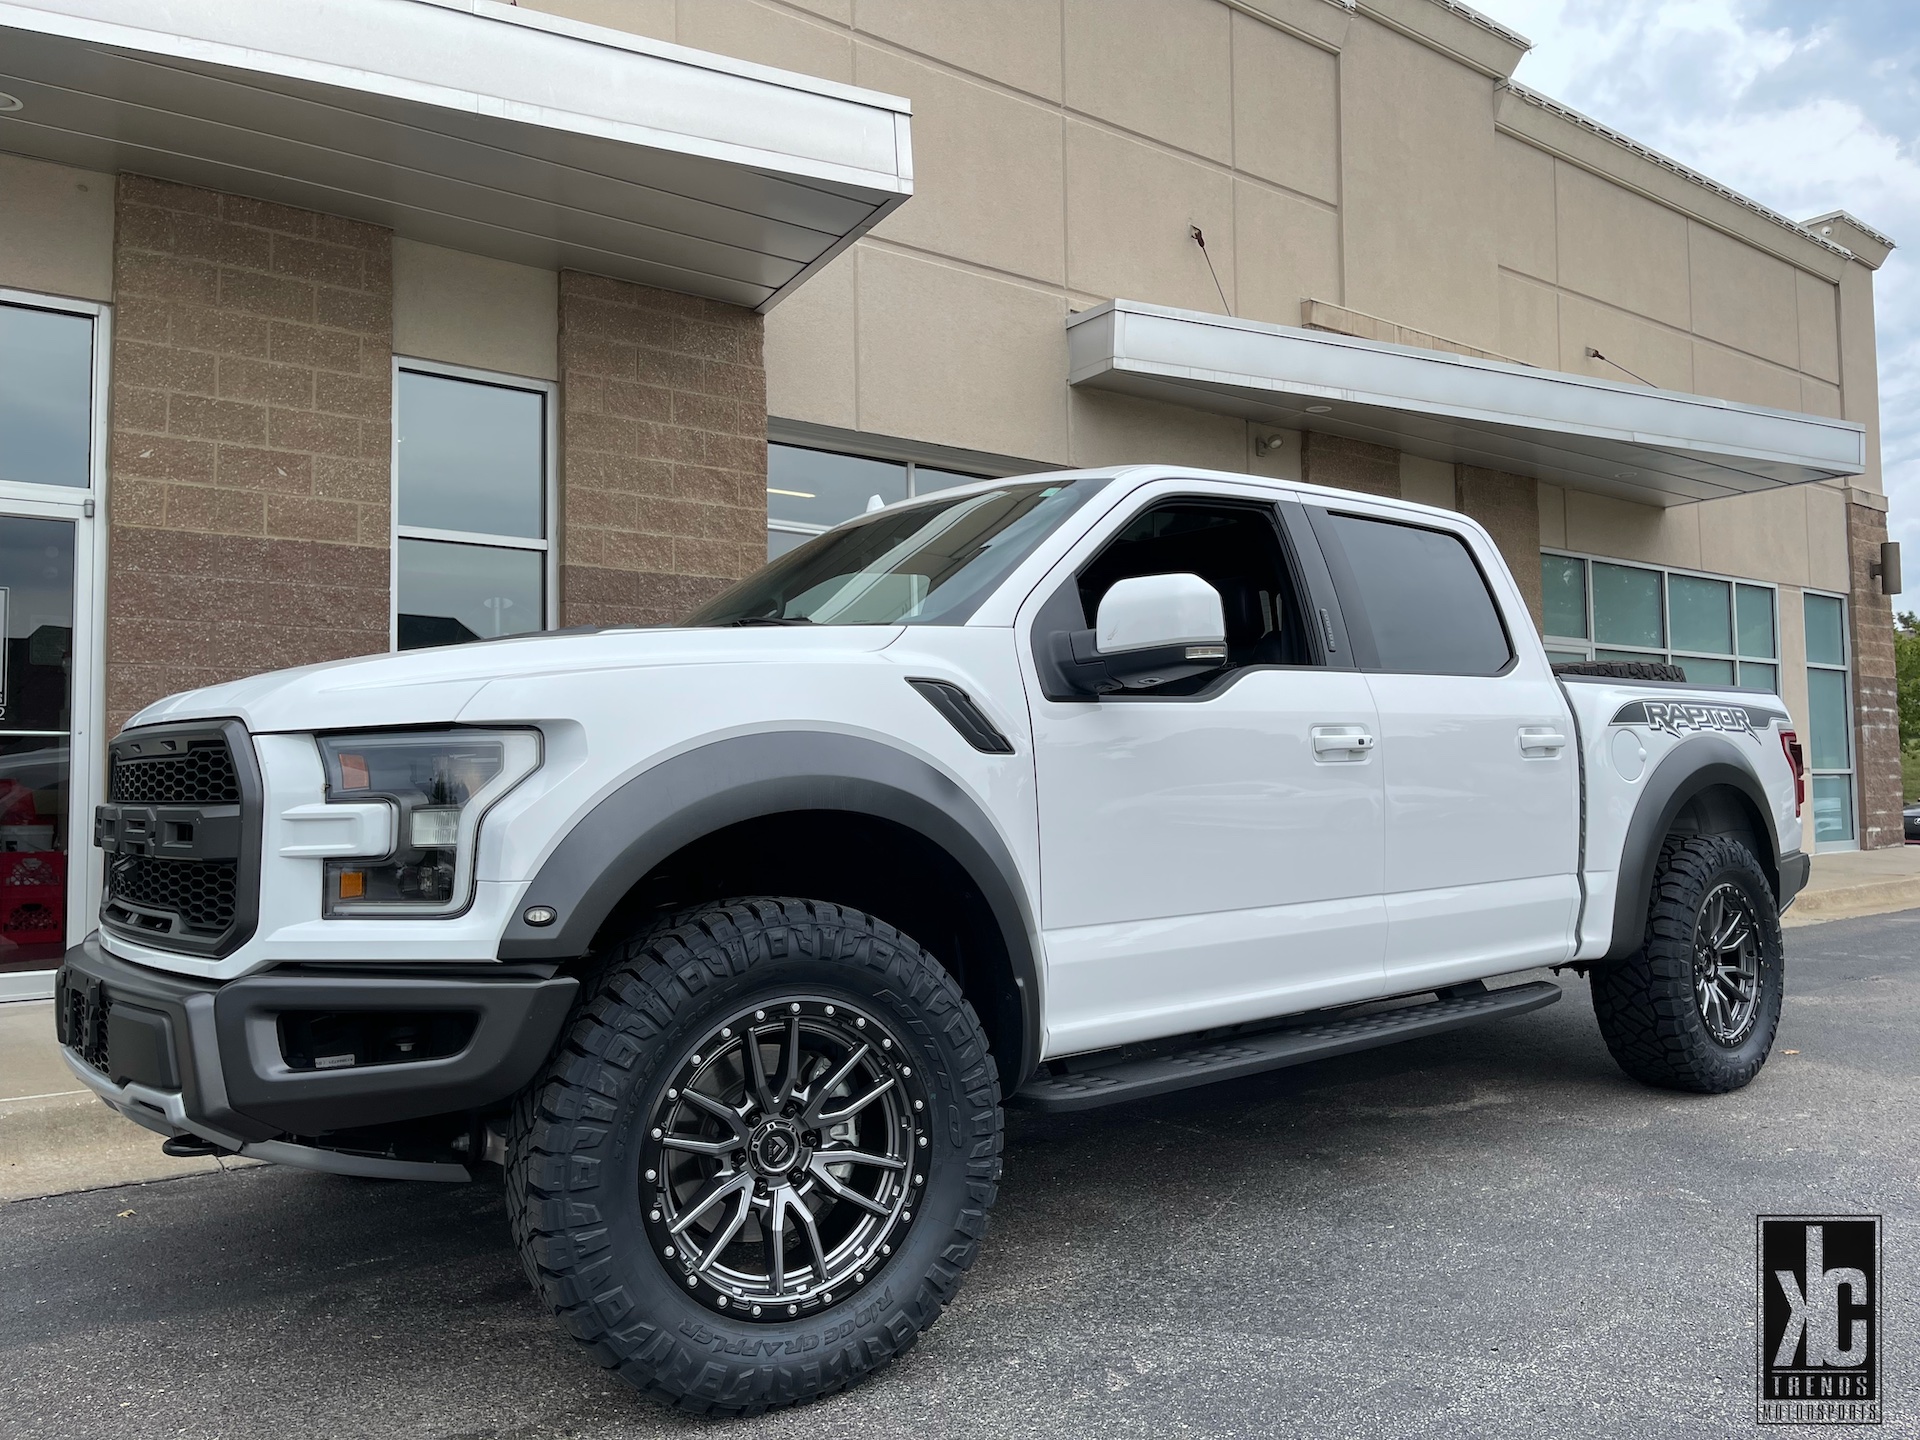  Ford F-150 with Fuel 1-Piece Wheels Rebel 6 - D680